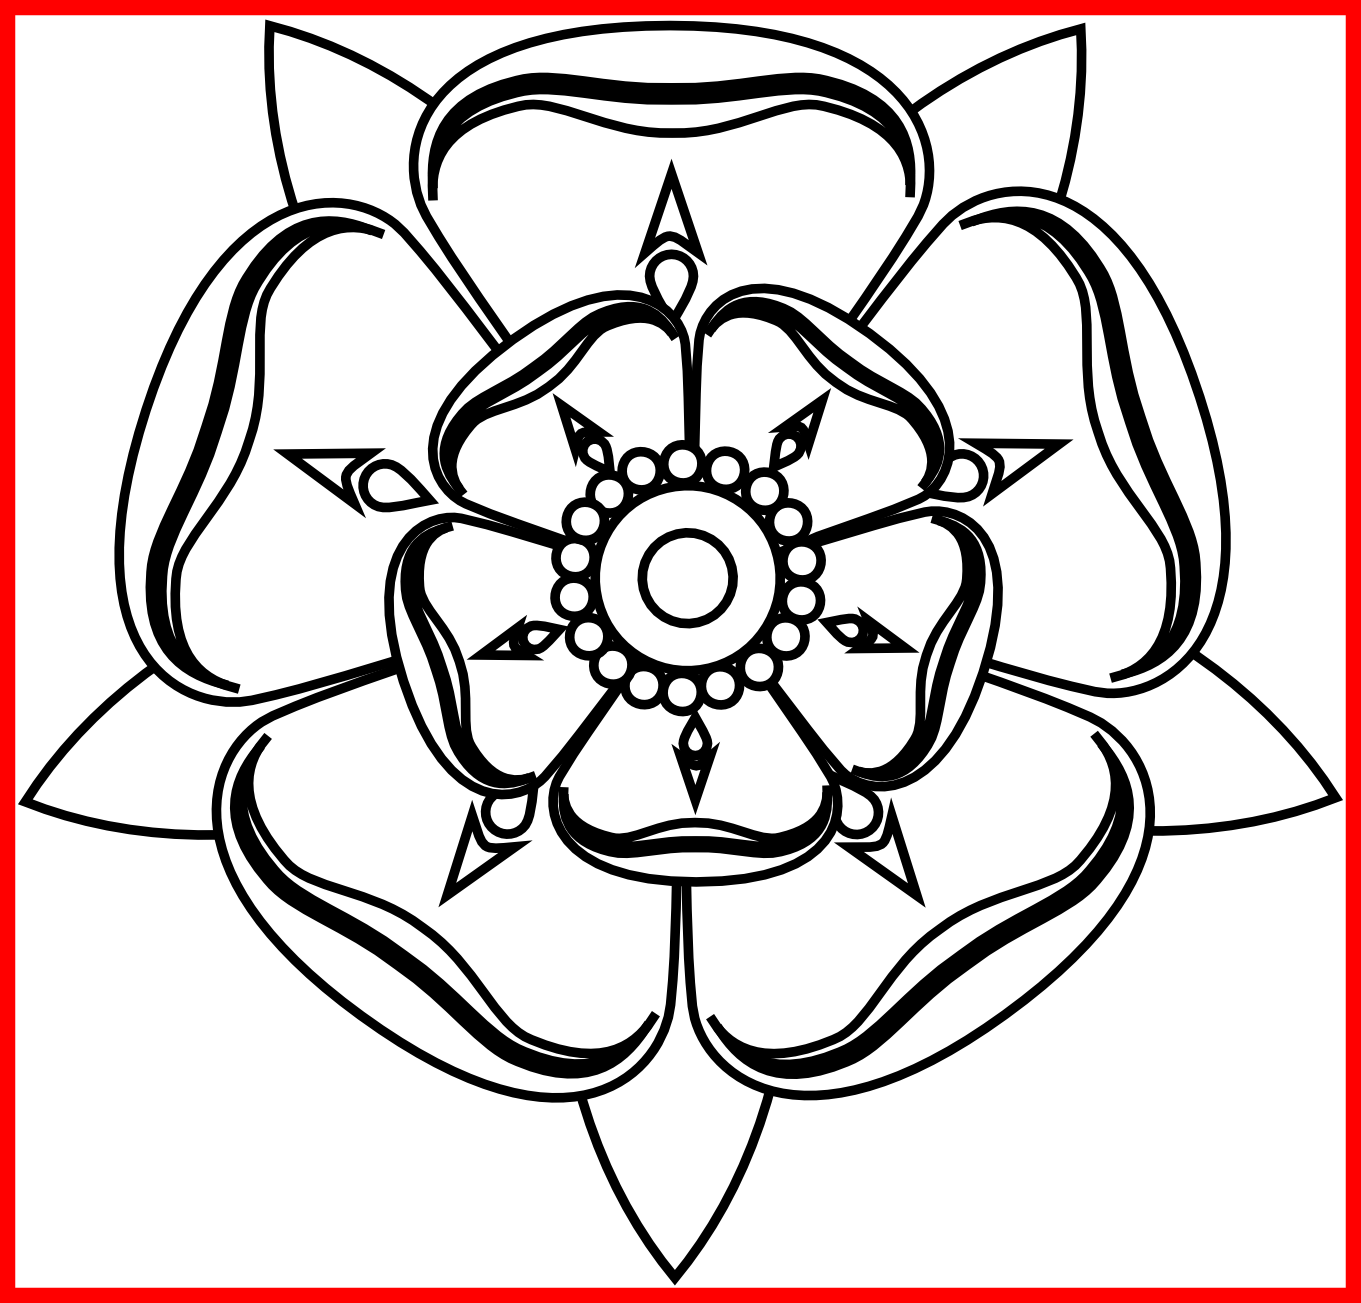 Amazing Rose Black And White Outline Floral Victorian - Tudor Rose Colouring Page (1361x1303)